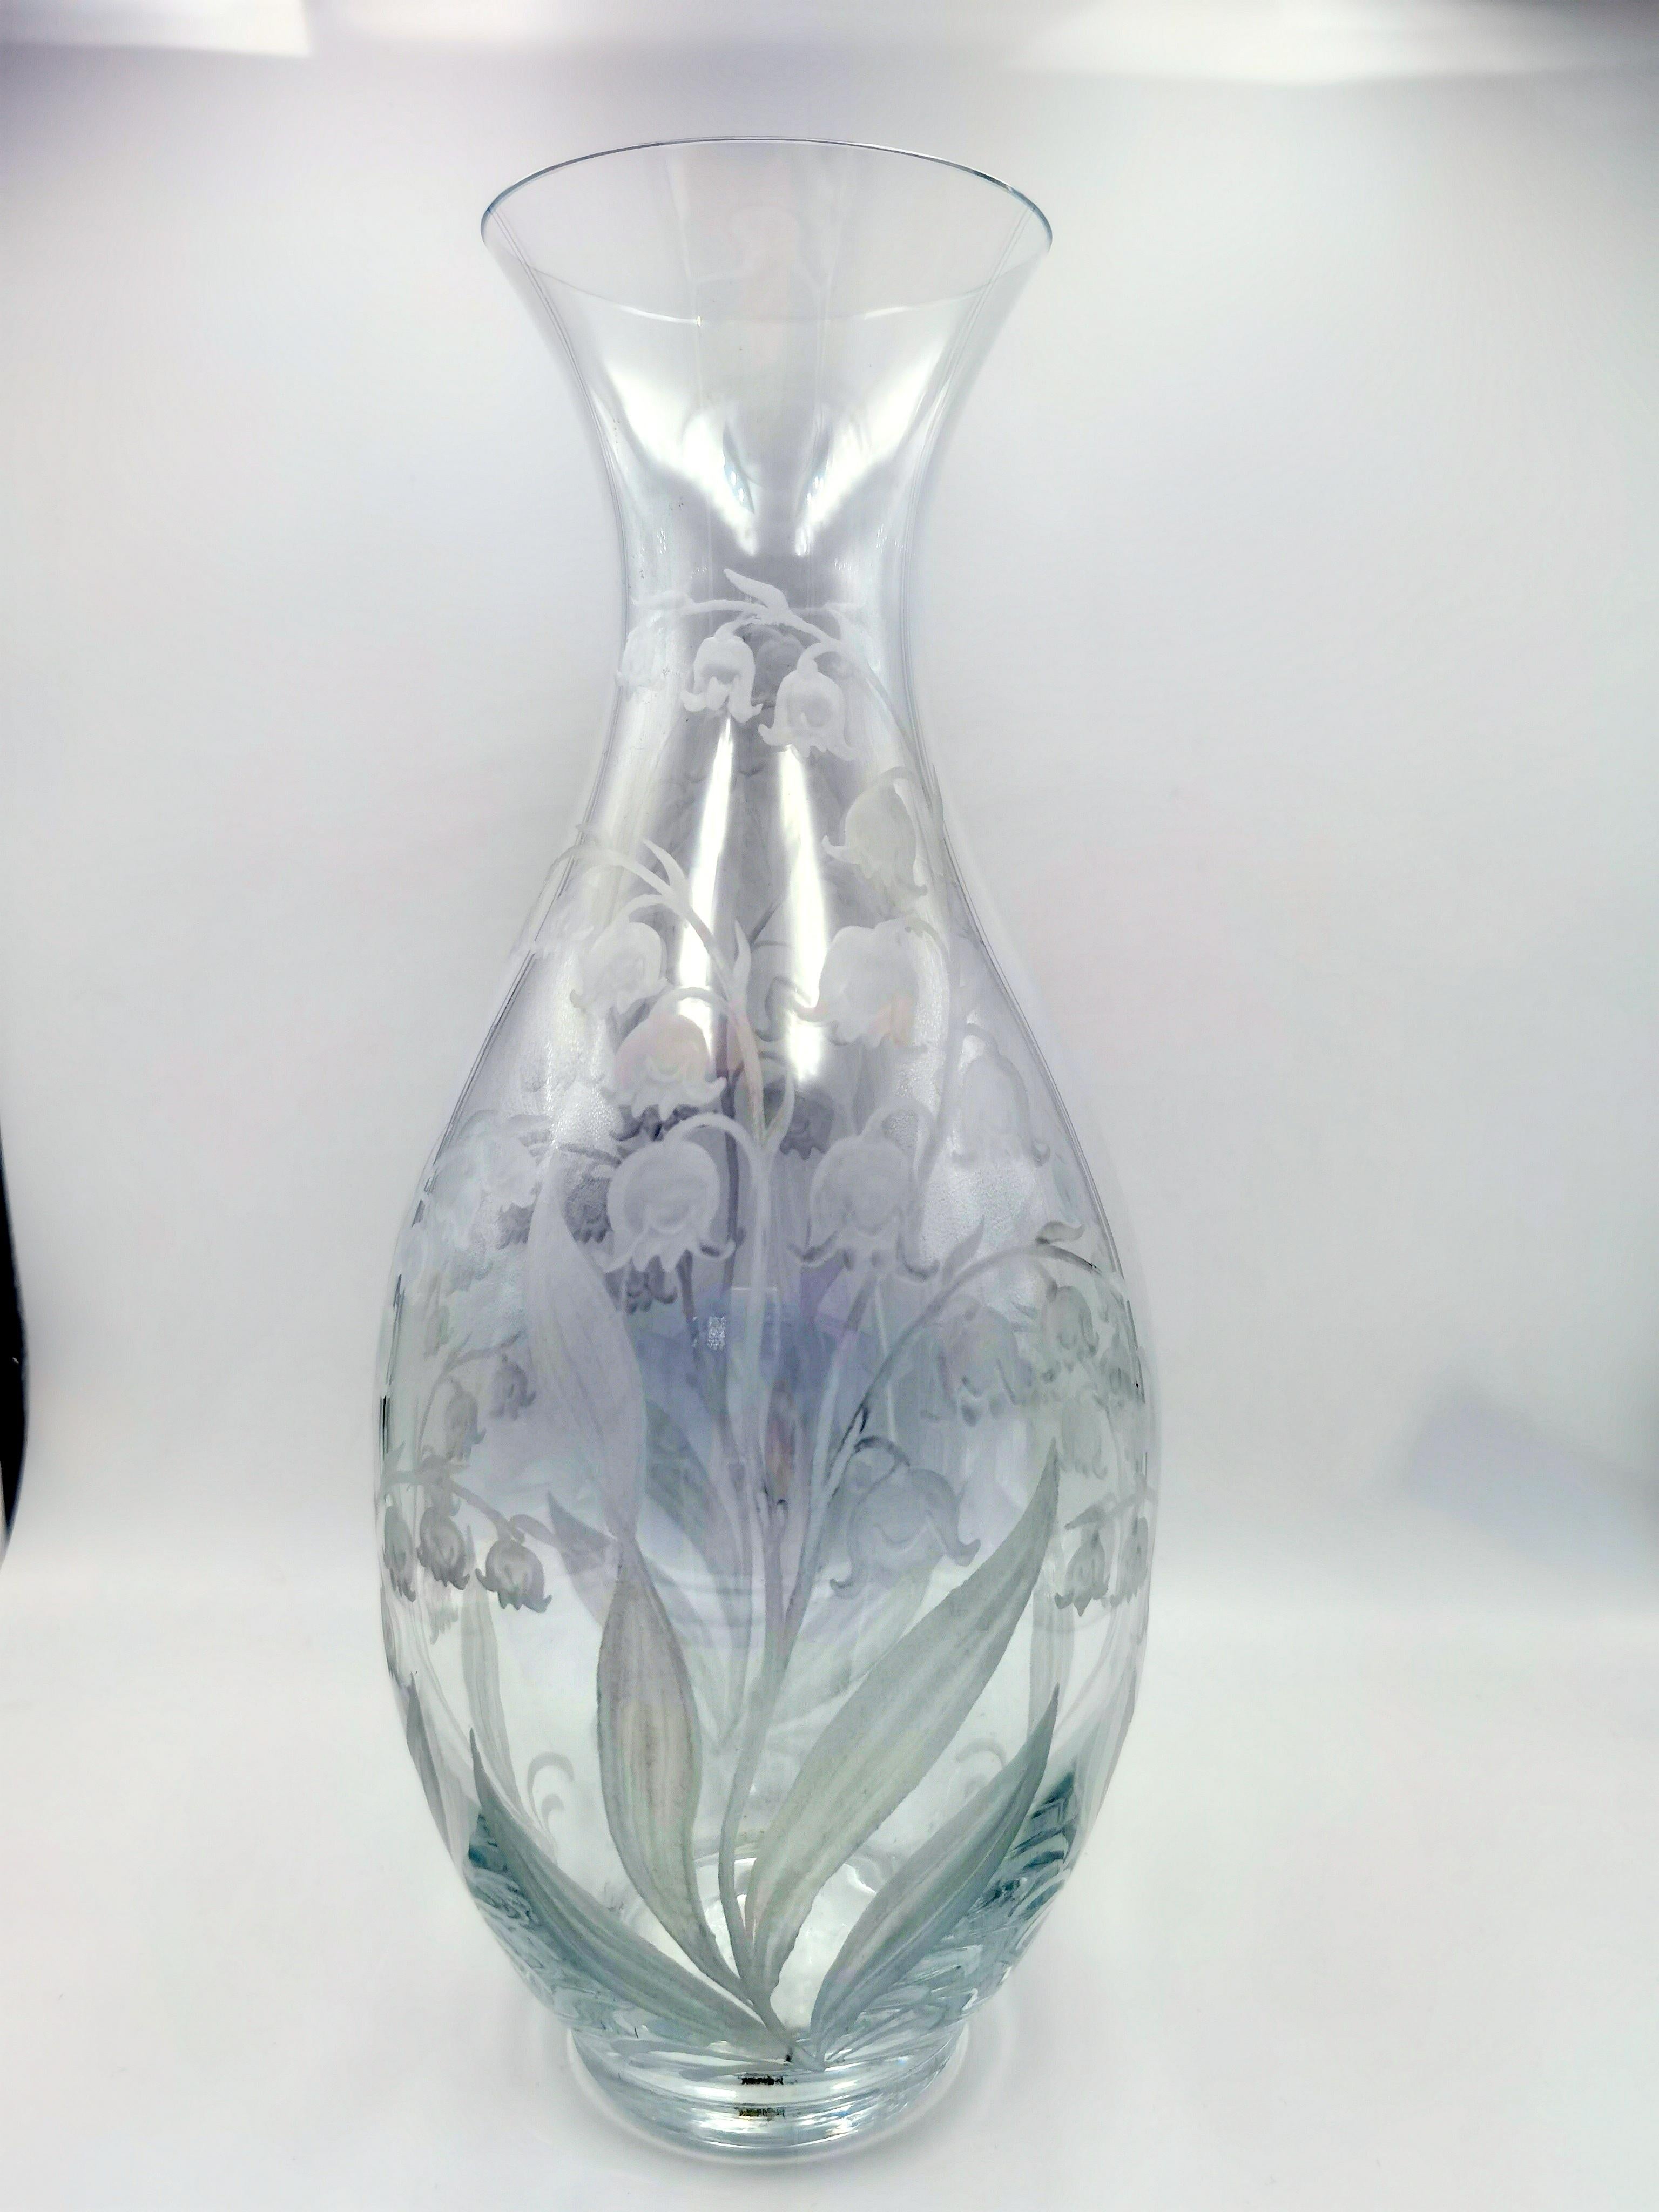 Hand blown carafe in clear crystal with a hand-engraved country style decor Lily of the Valley all around. Handmade in Bavaria for Sofina Boutique Kitzbühel Austria. A matching vase and tumblers are available. Can be ordered in different colors.